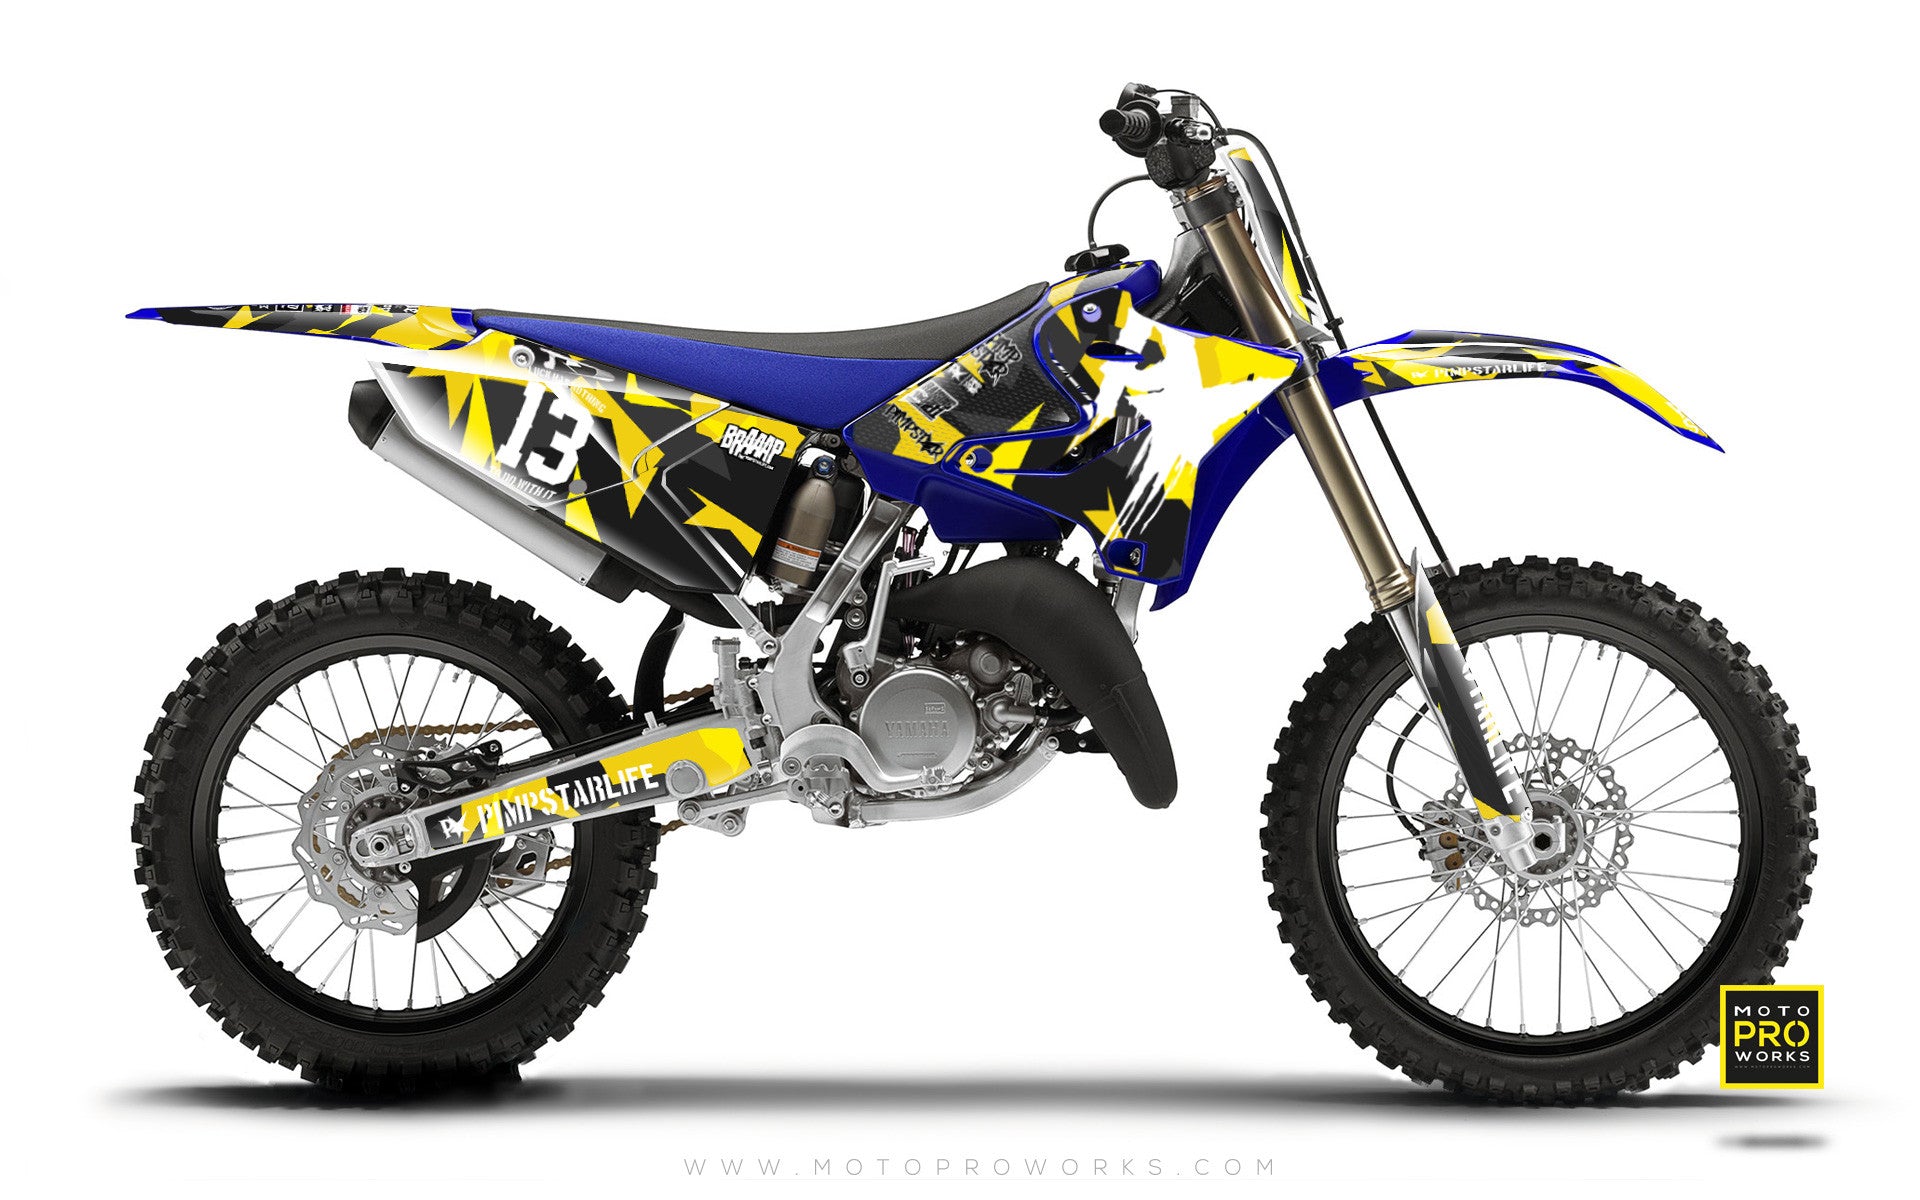 Yamaha GRAPHIC KIT - "M90" (wasp) - MotoProWorks | Decals and Bike Graphic kit